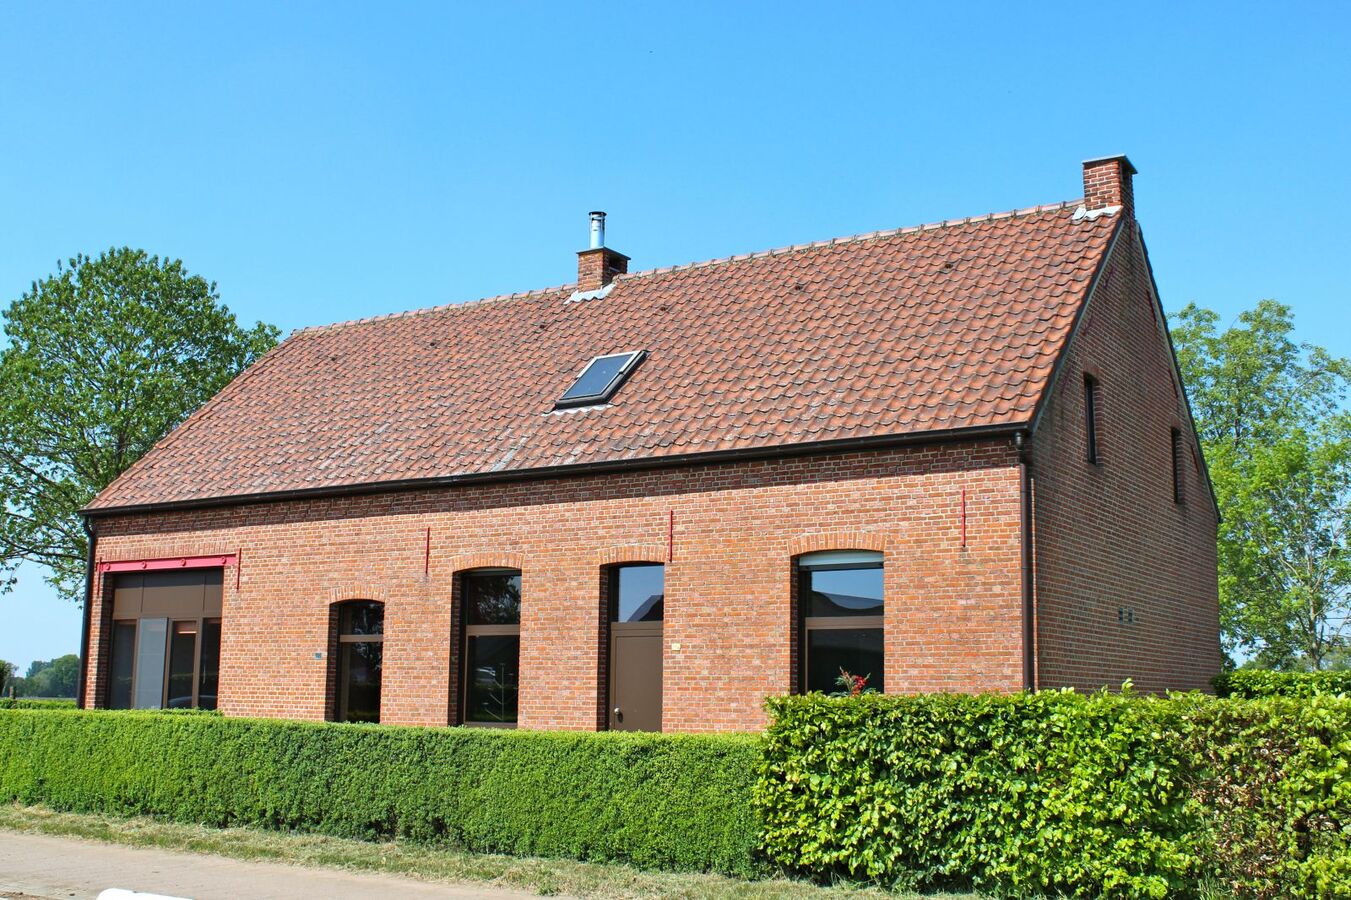 Property sold in Herenthout